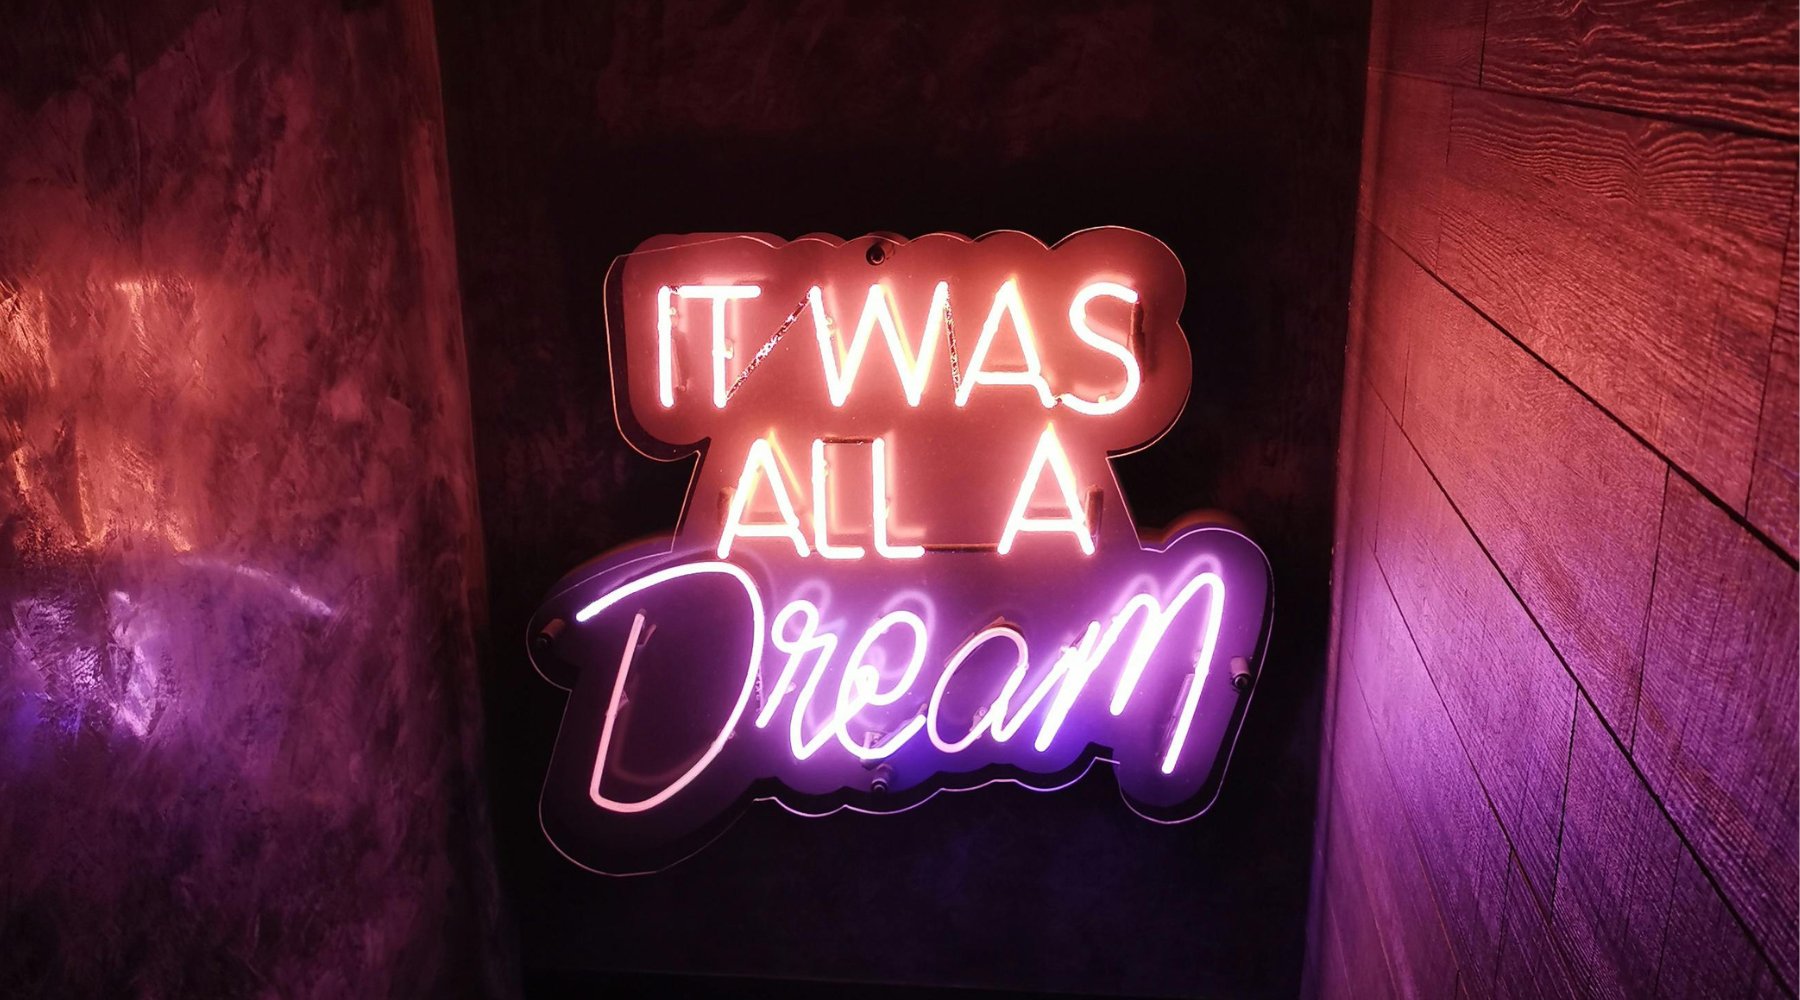 The Most Instagrammable Custom Neon Signs for Home Decor